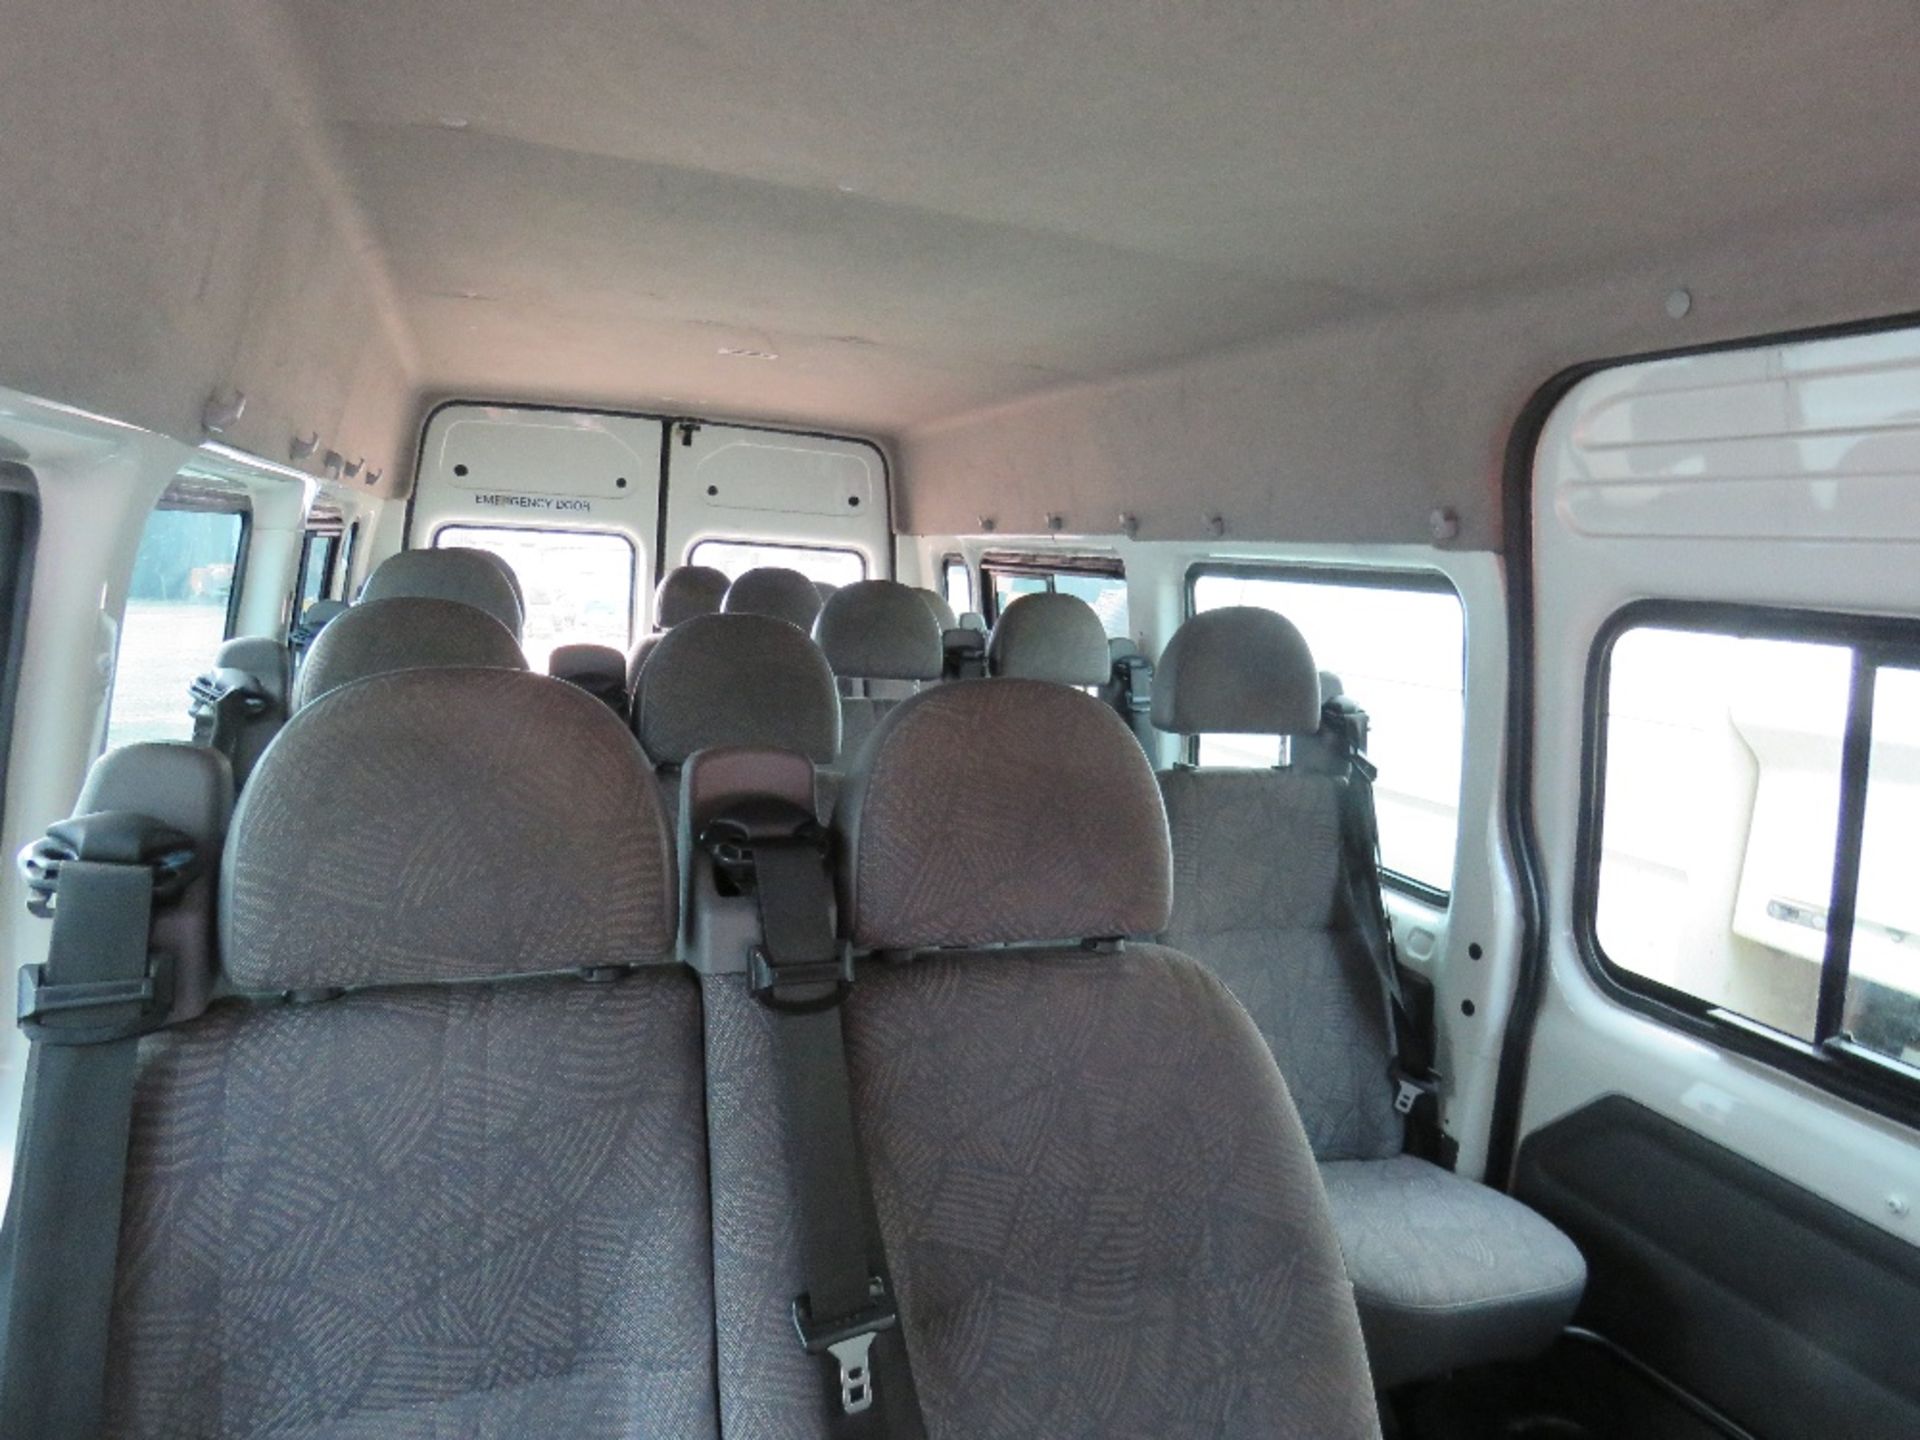 FORD TRANSIT 17 SEATER MINIBUS, REG: BP05 FVW 43,645 REC MILES?? WITH V5 WHEN TESTED WAS SEEN TO - Image 5 of 5